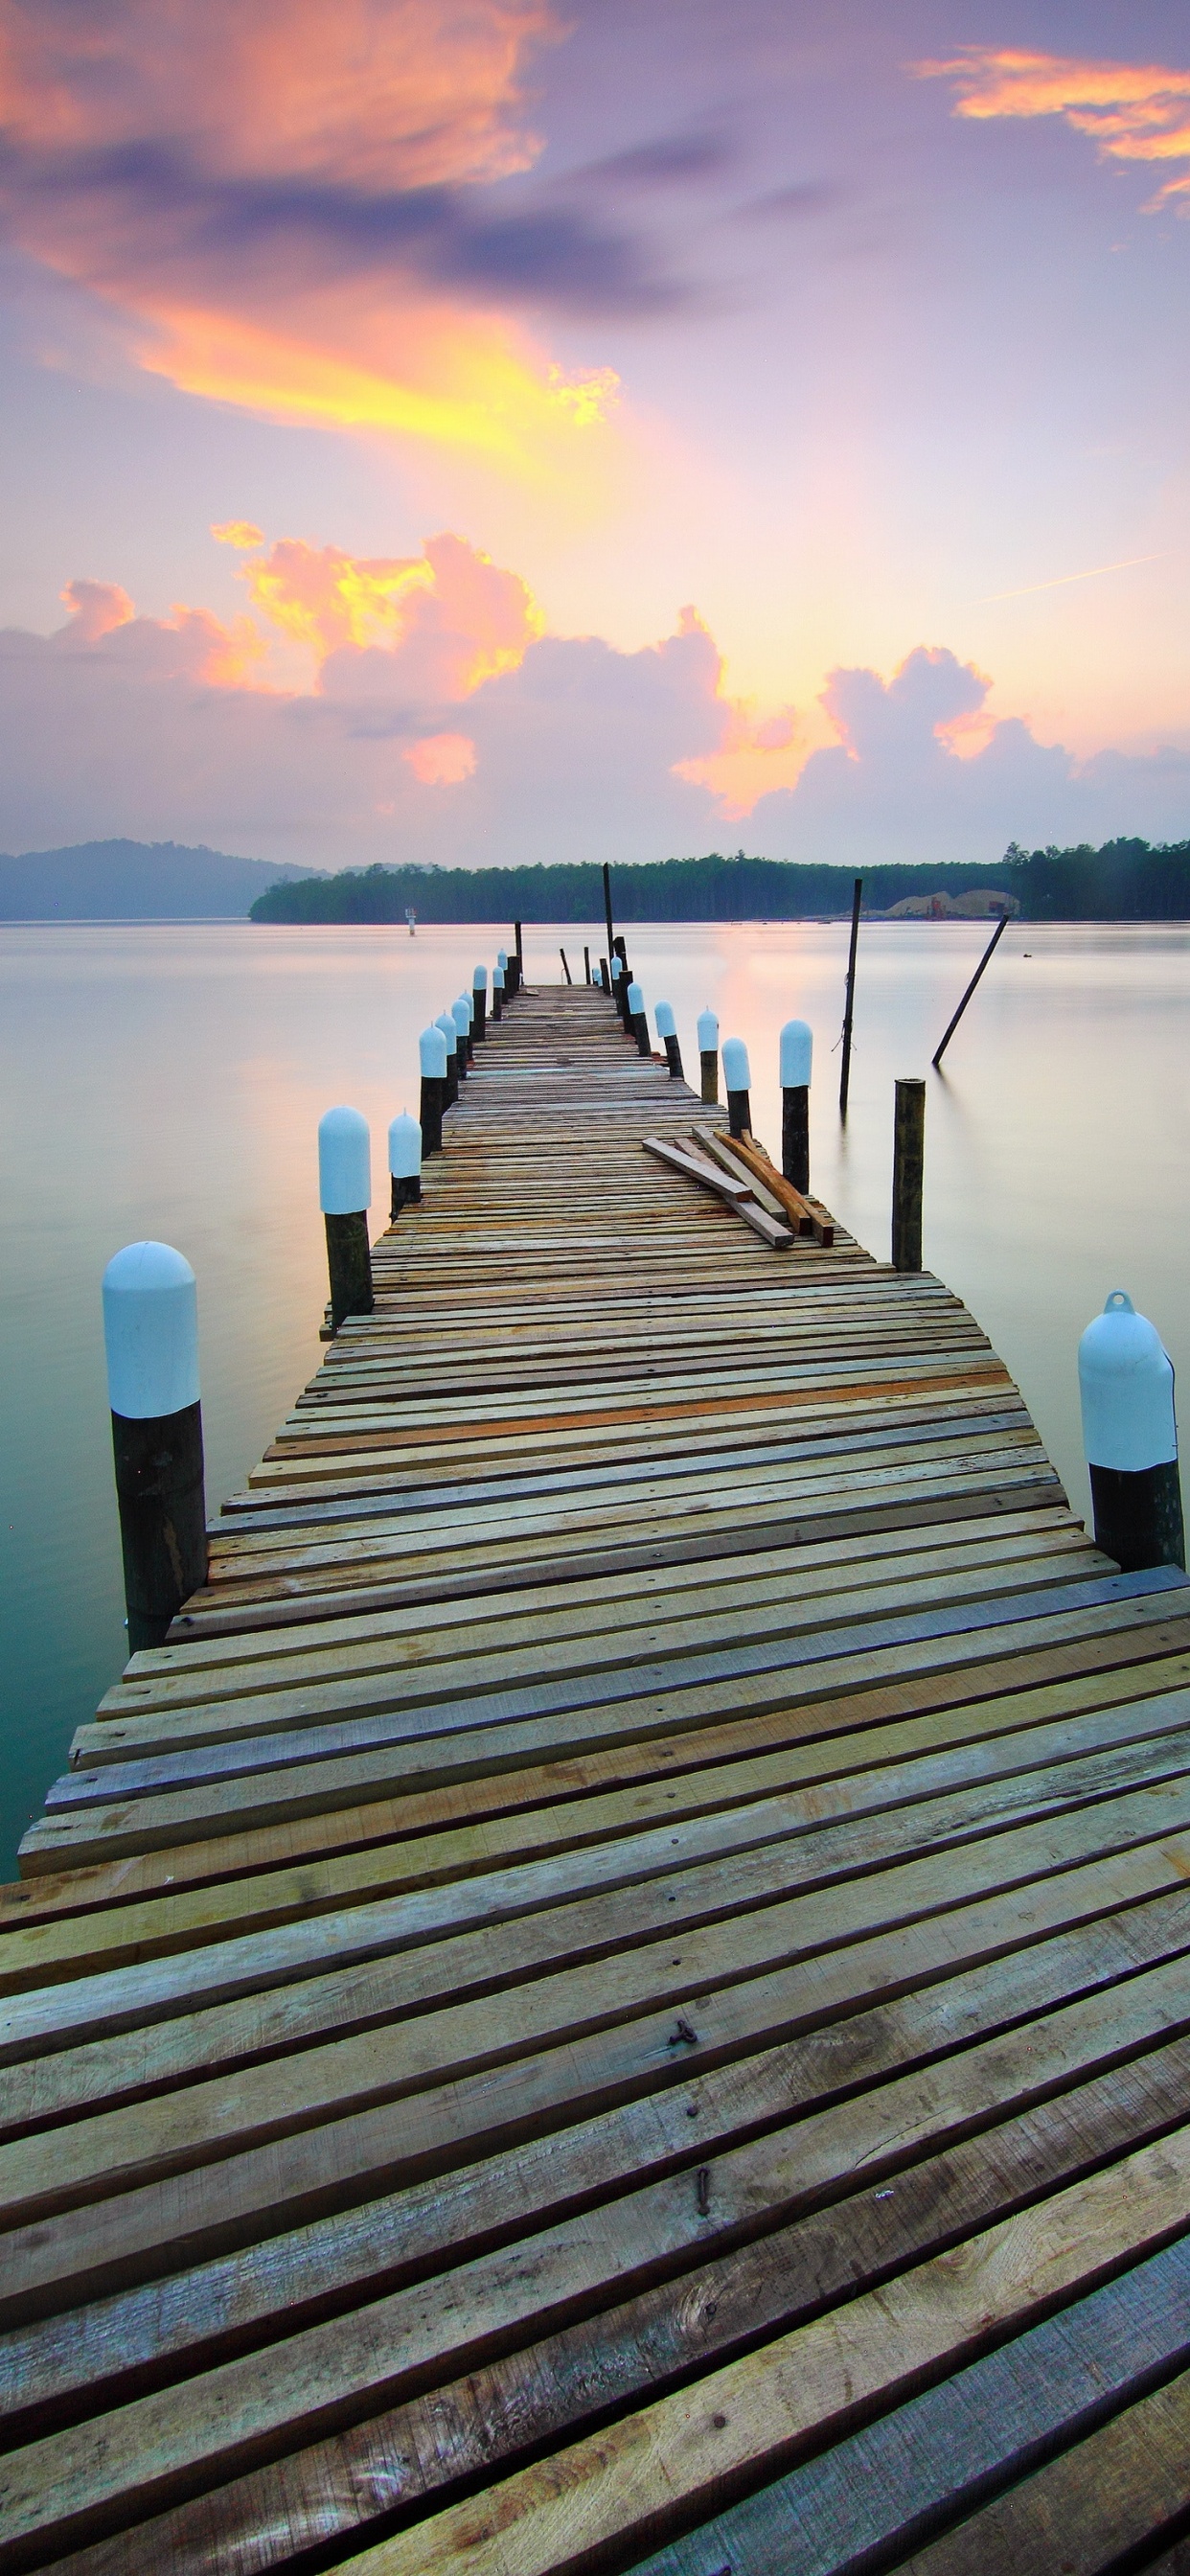 Brown Wooden Dock on Lake During Sunset. Wallpaper in 1242x2688 Resolution